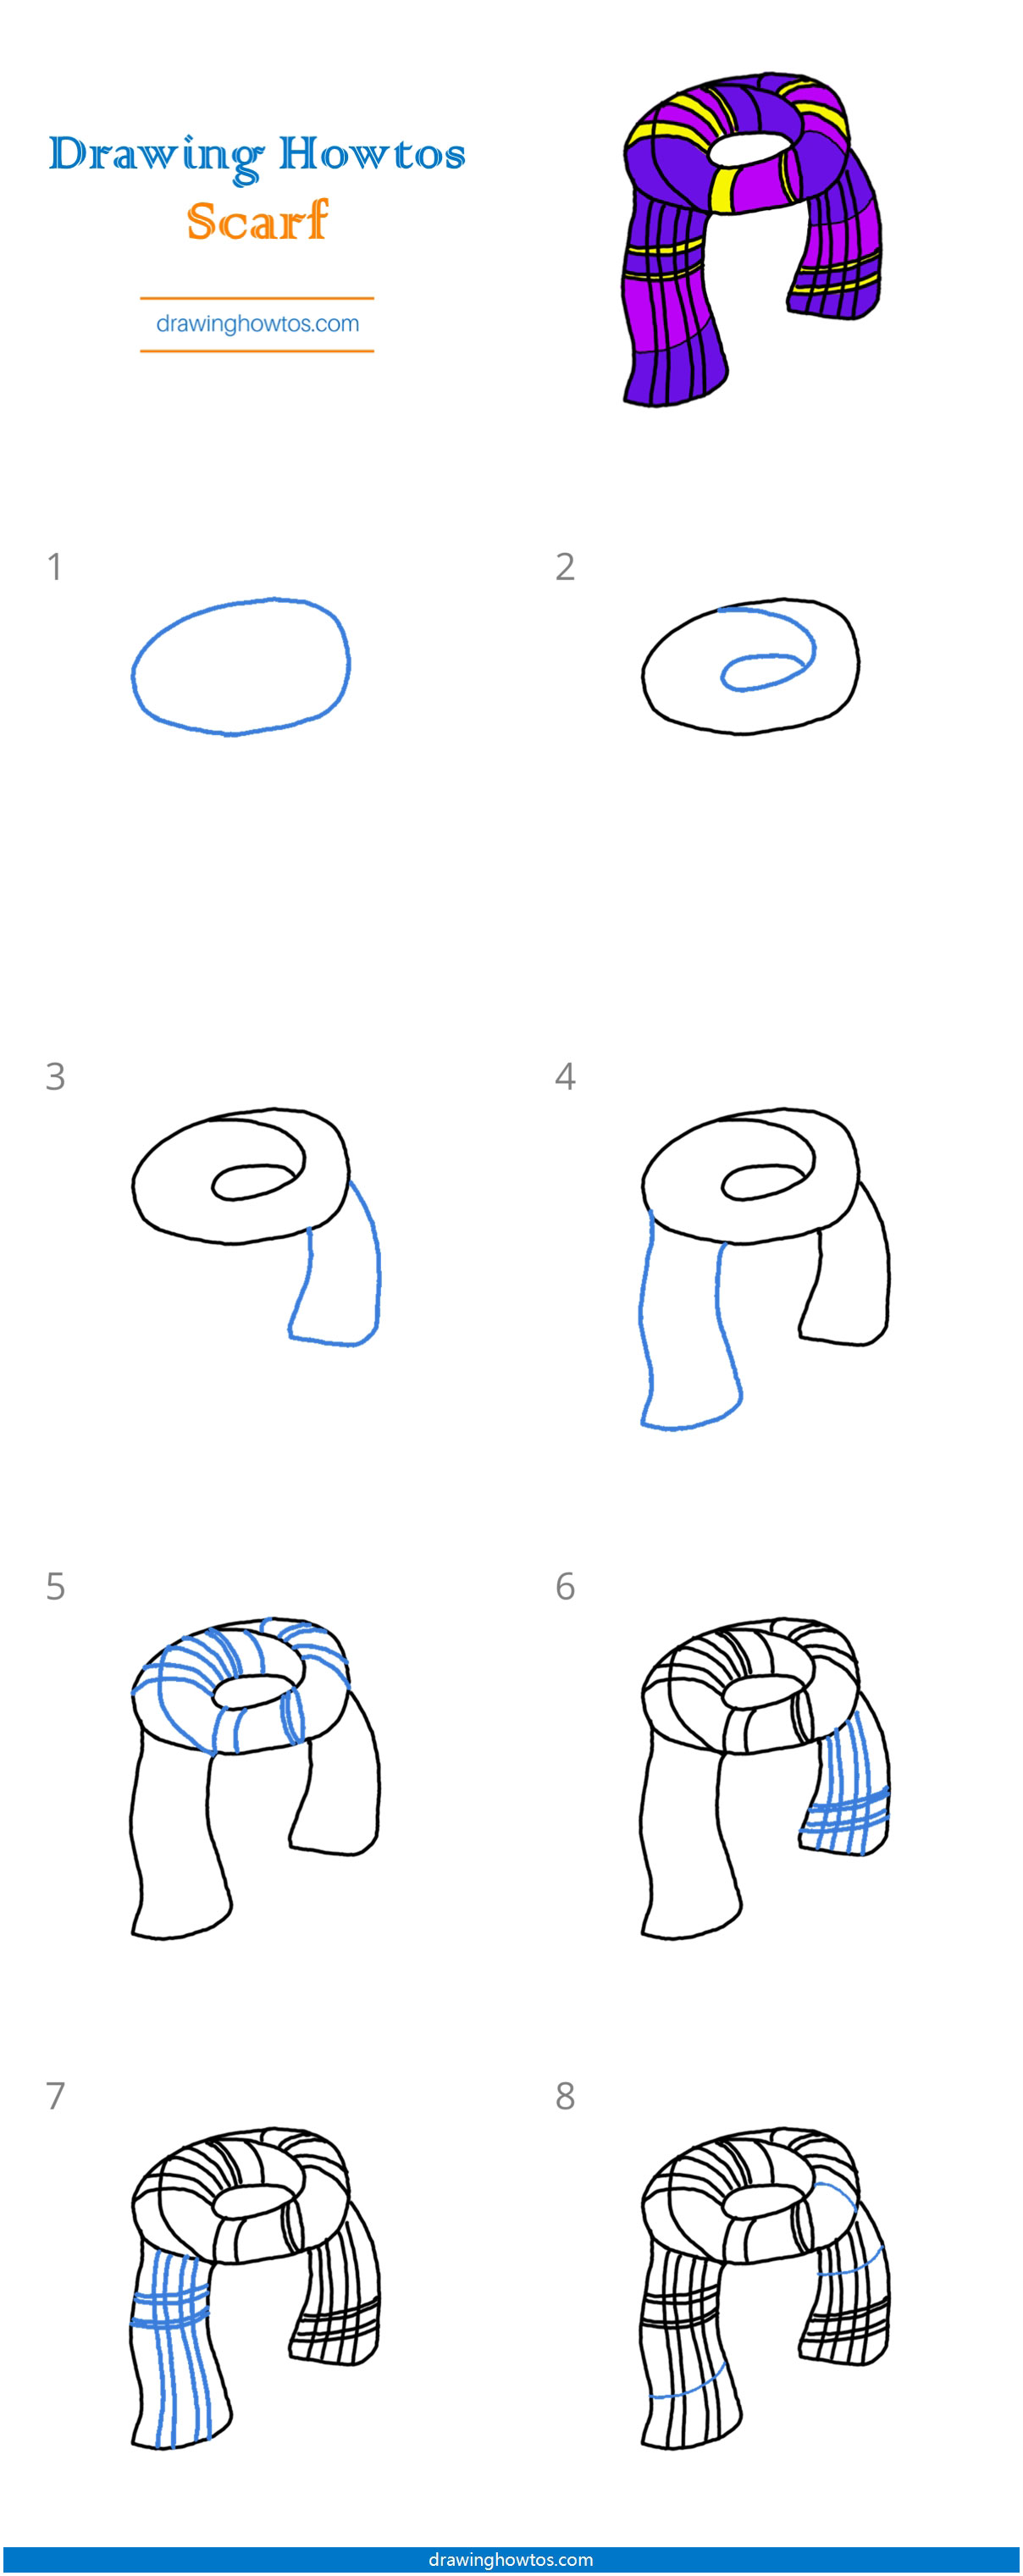 How to Draw a Scarf Step by Step